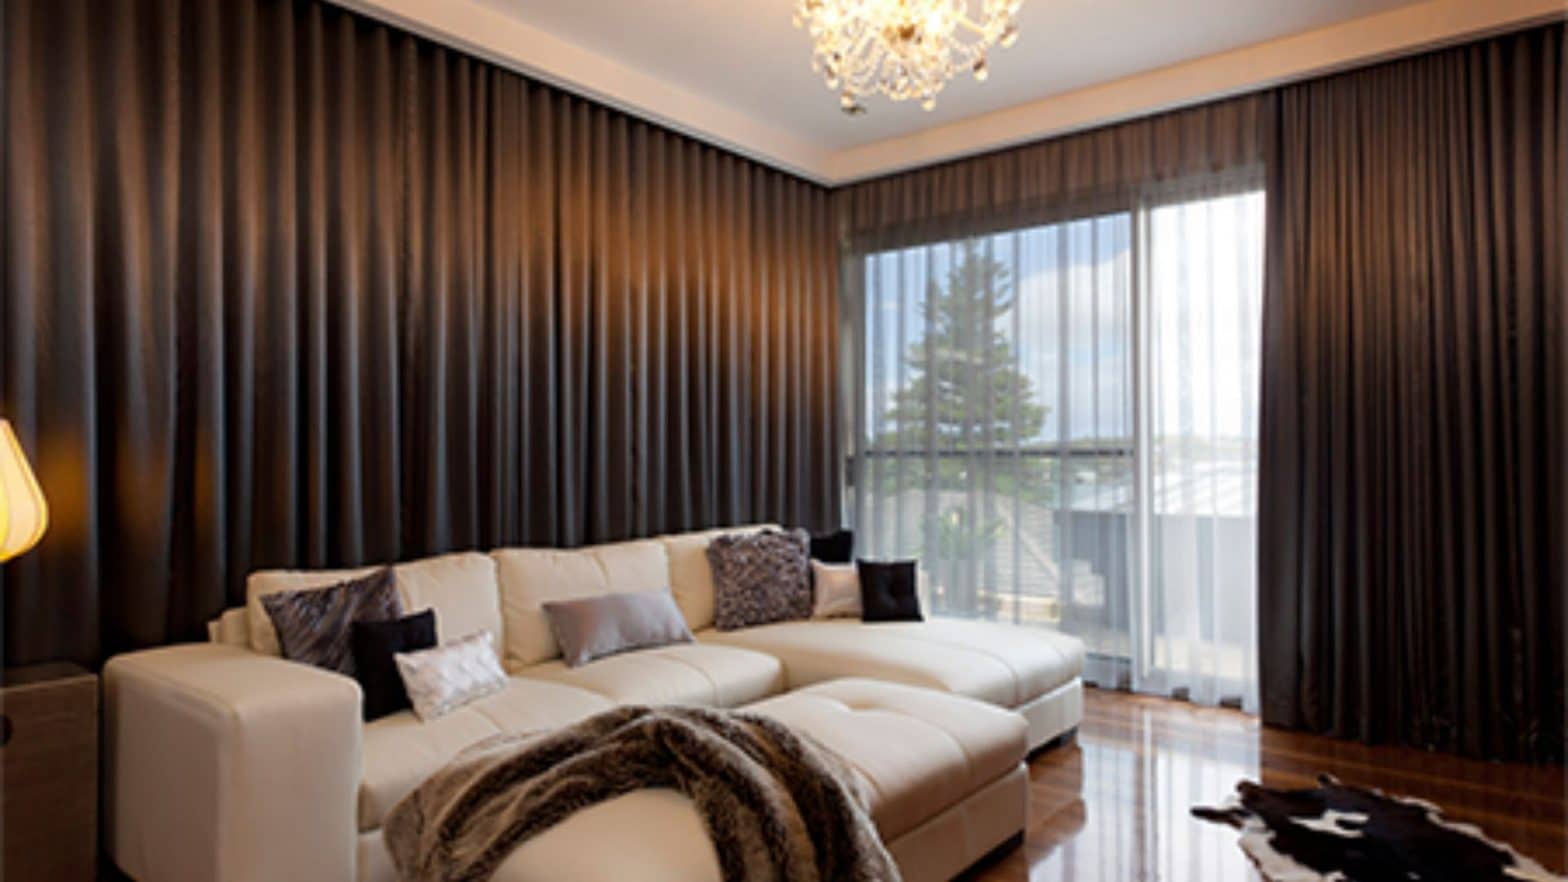 What Are the Key Features to Look for in Motorized Curtains